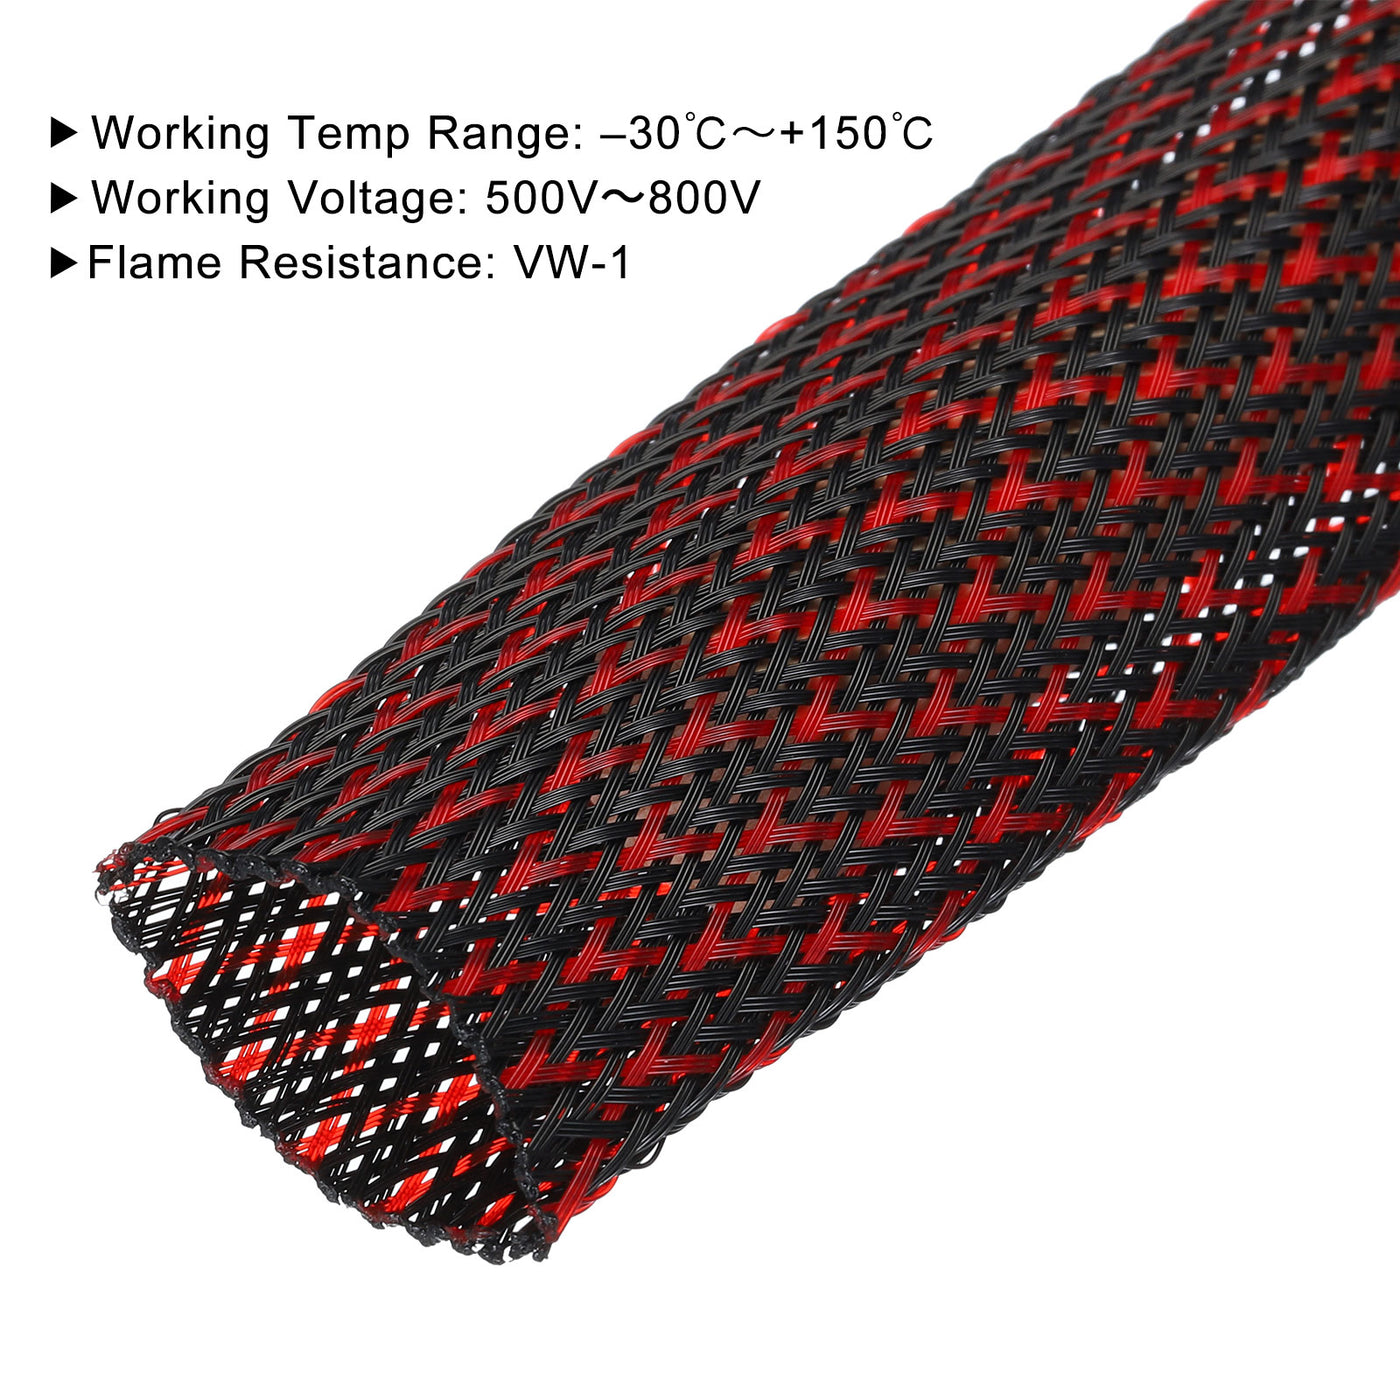 uxcell Uxcell Insulation Braid Sleeving, 16.4 Ft-32mm High Temperature Sleeve Black Red